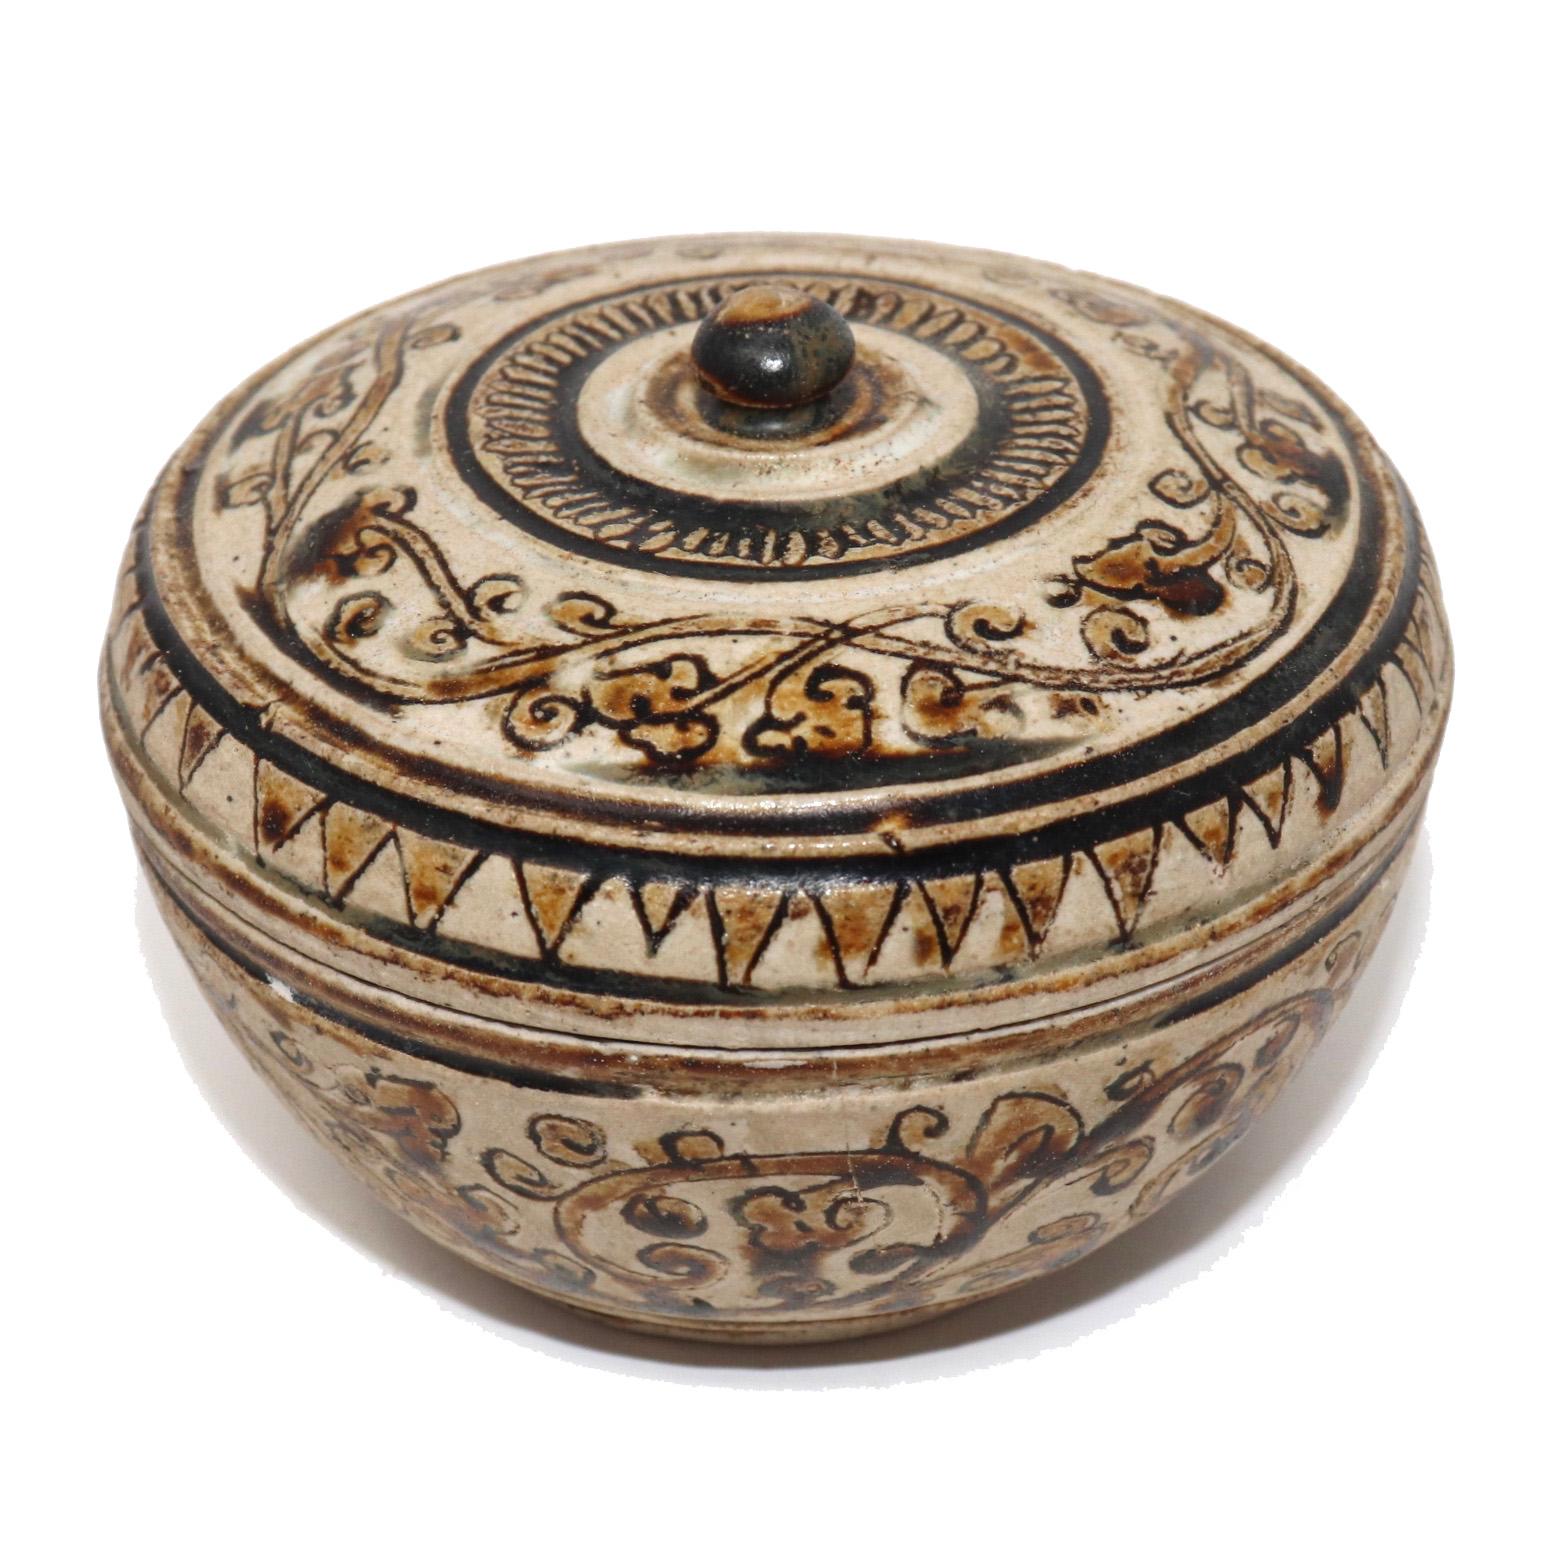 Antique ceramic condiment box from the Sawankhalok kilns, Thailand of shouldered globular form with a domed top having a serrated petal ring around a raised button finial the domed portion with continuous foliate vine design decorated in a